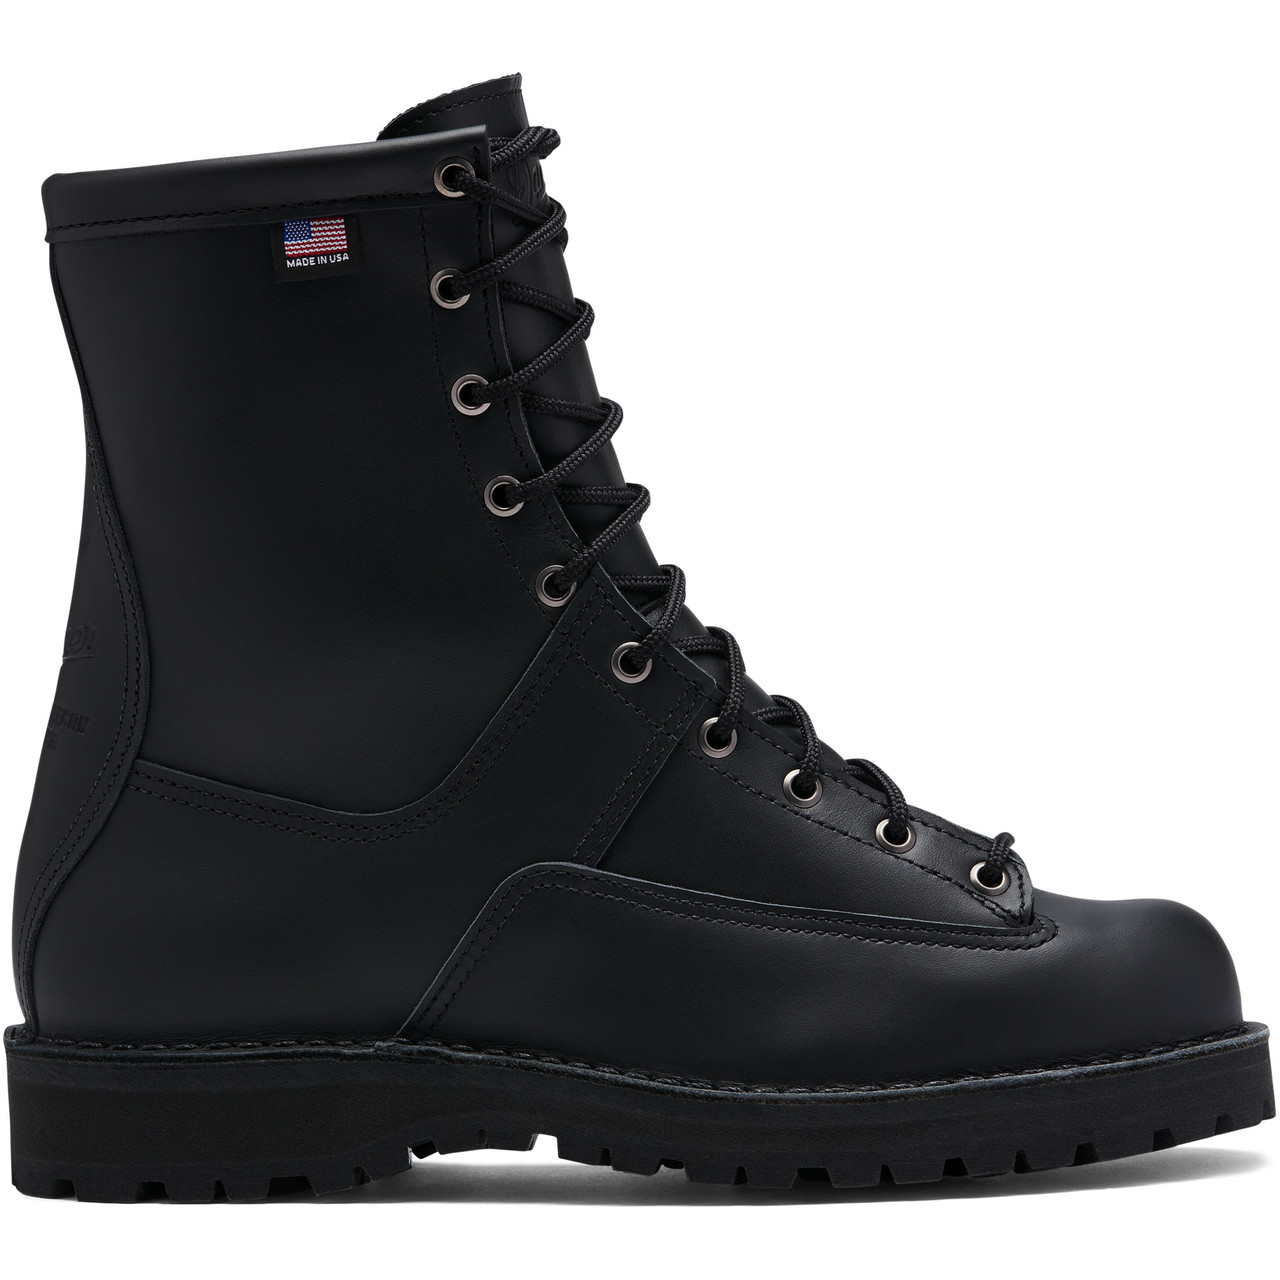 DANNER® RECON 8" BLACK 200G TACTICAL BOOTS 69410